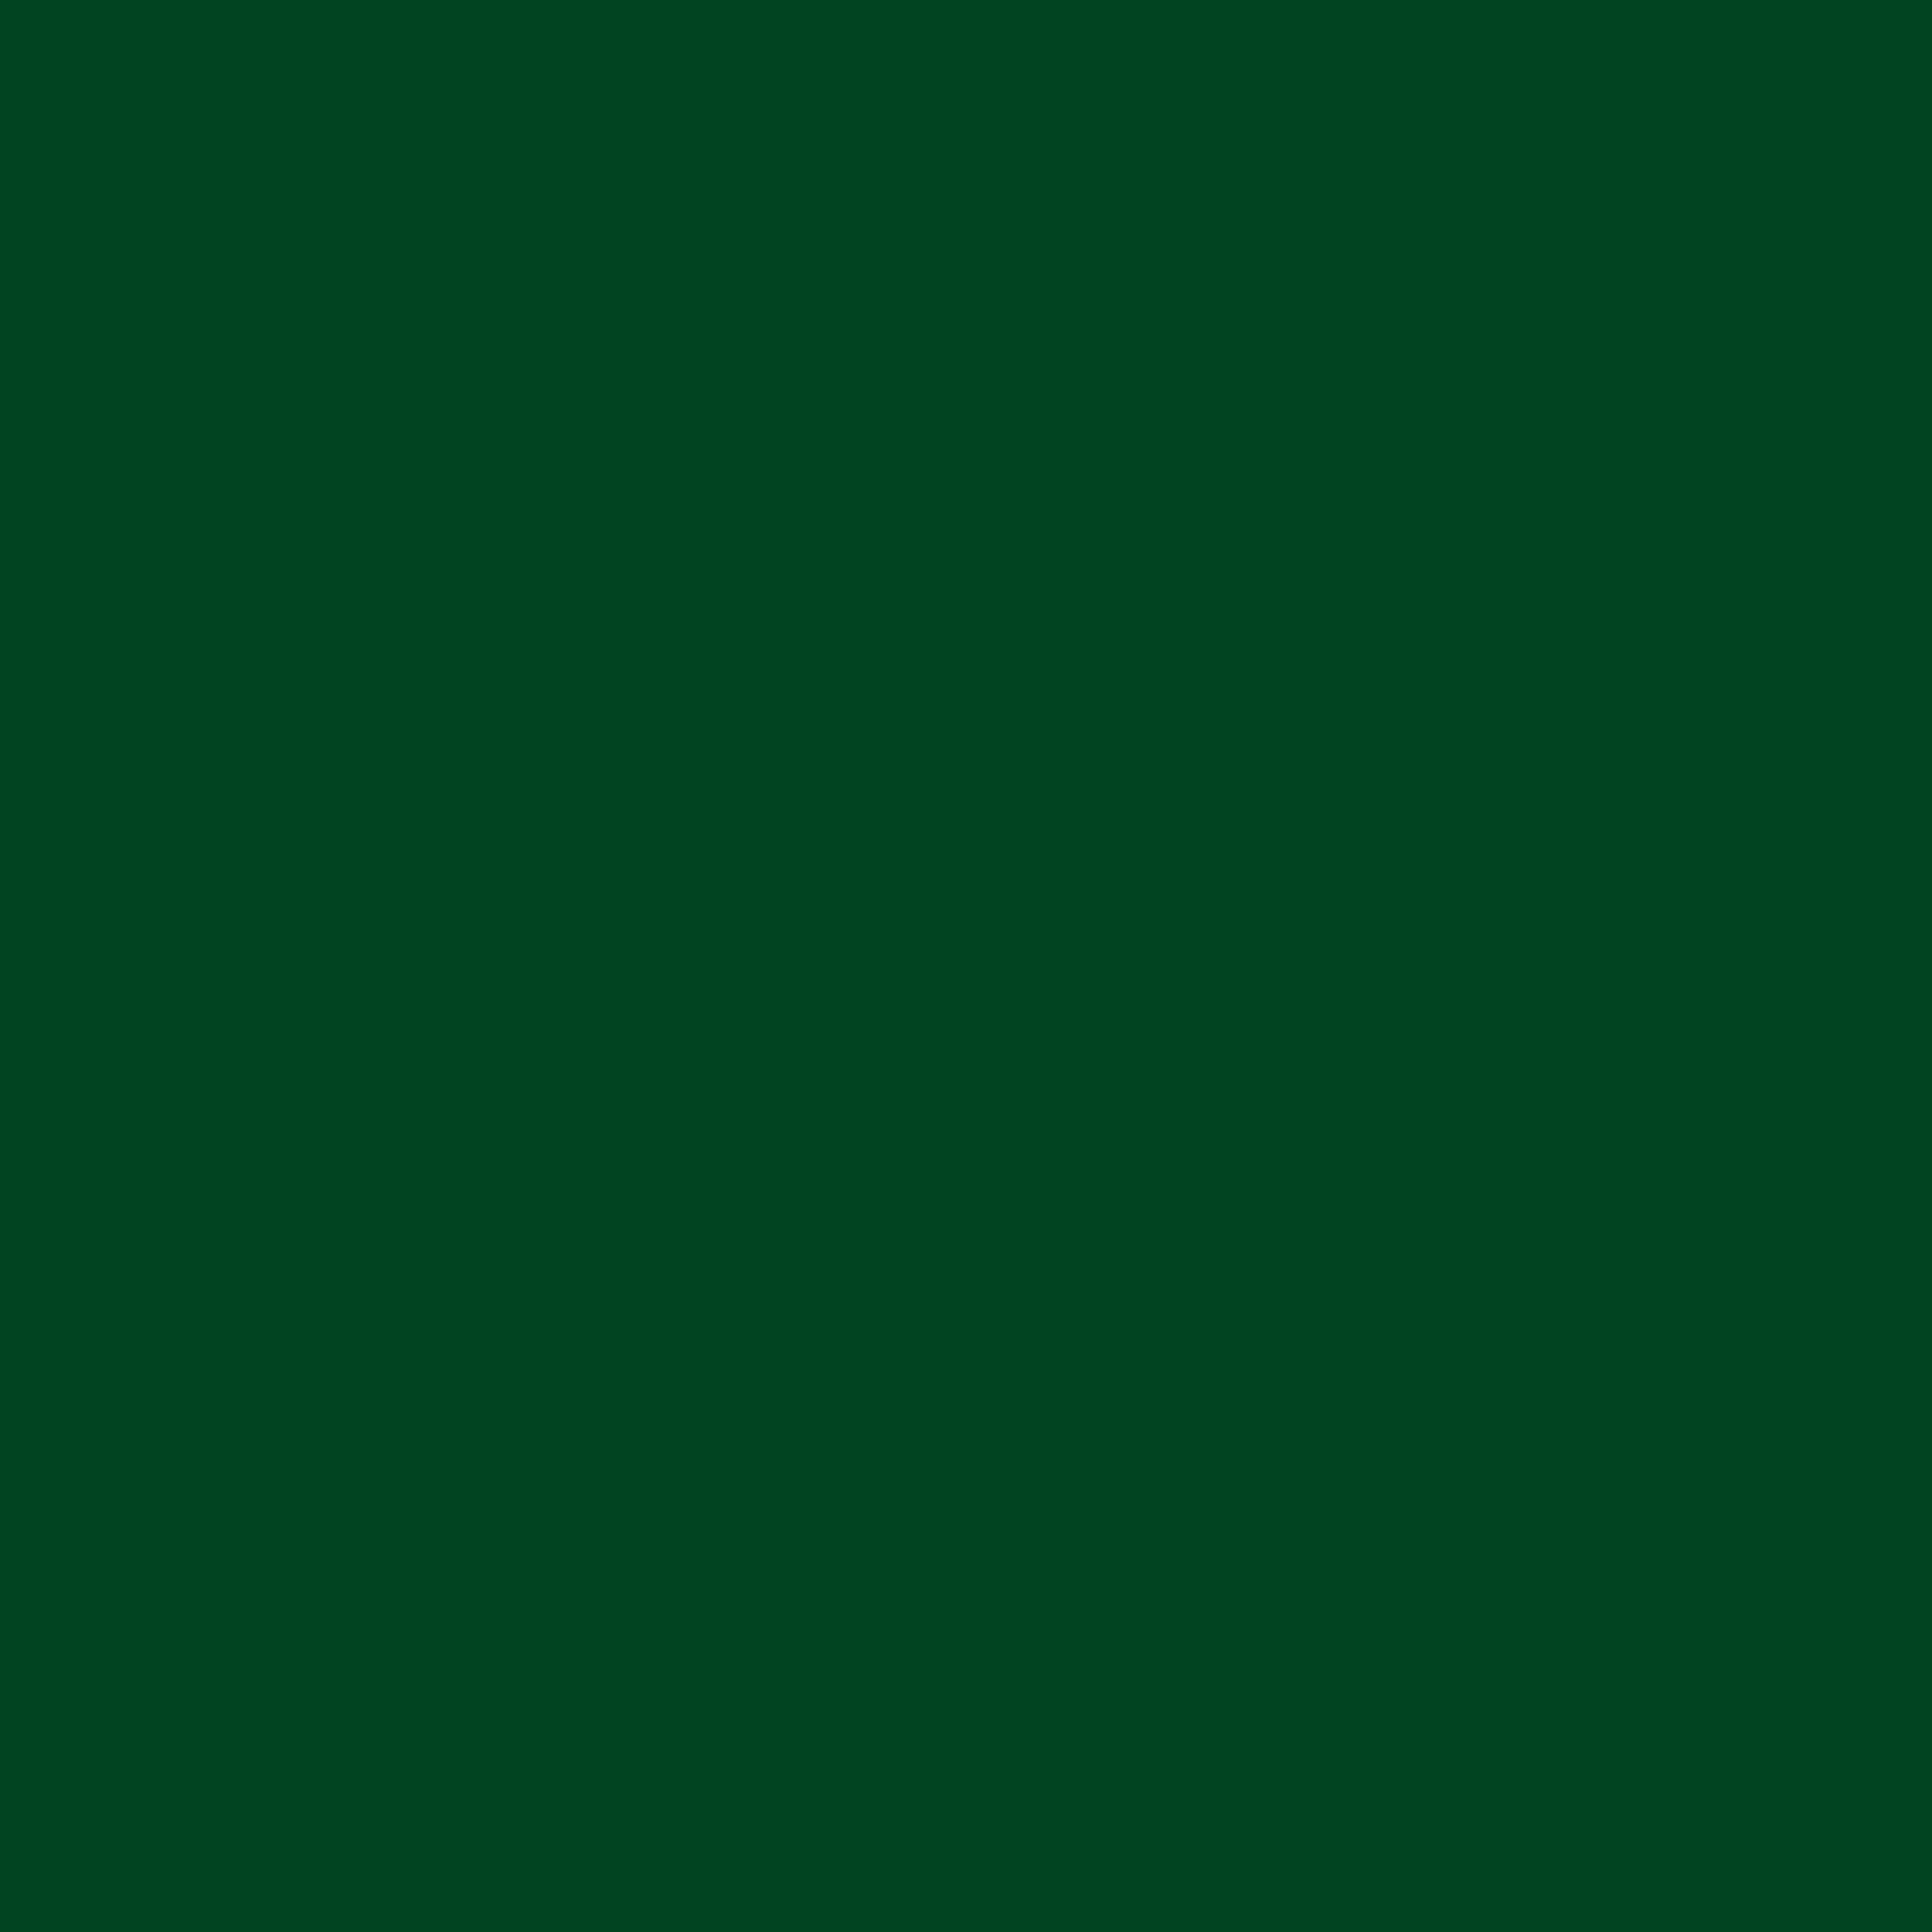 Download this Free Resolution Forest Green Traditional Solid Color picture